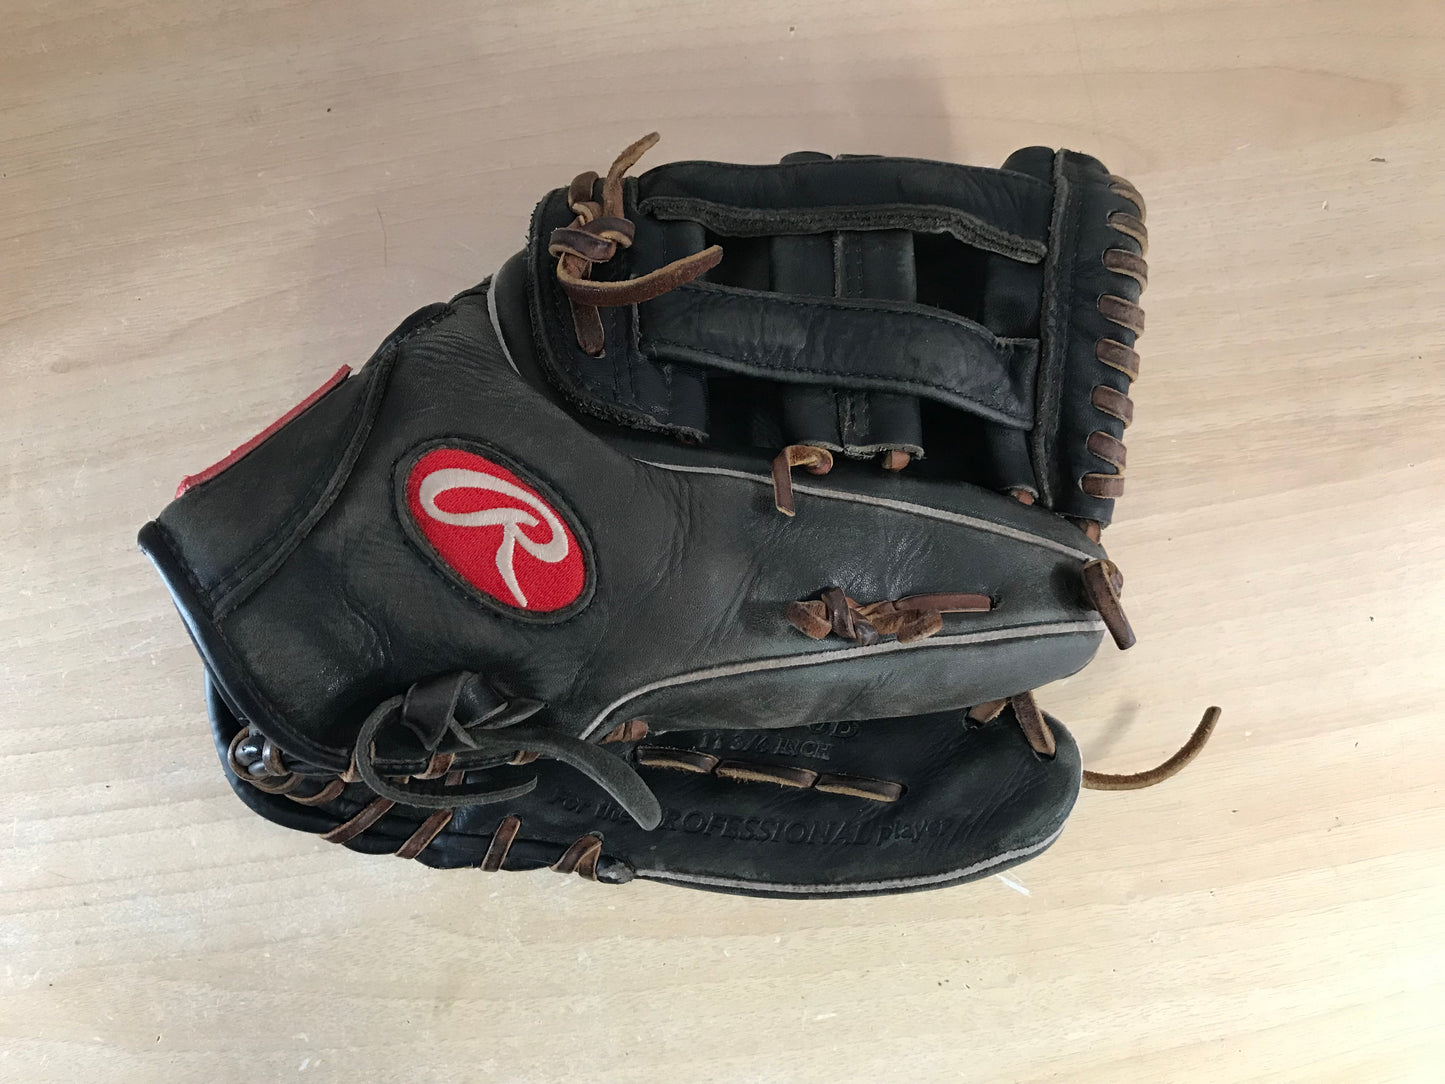 Baseball Glove Adult Size 11.75 inch Rawlings Black Leather Fits on Left Hand